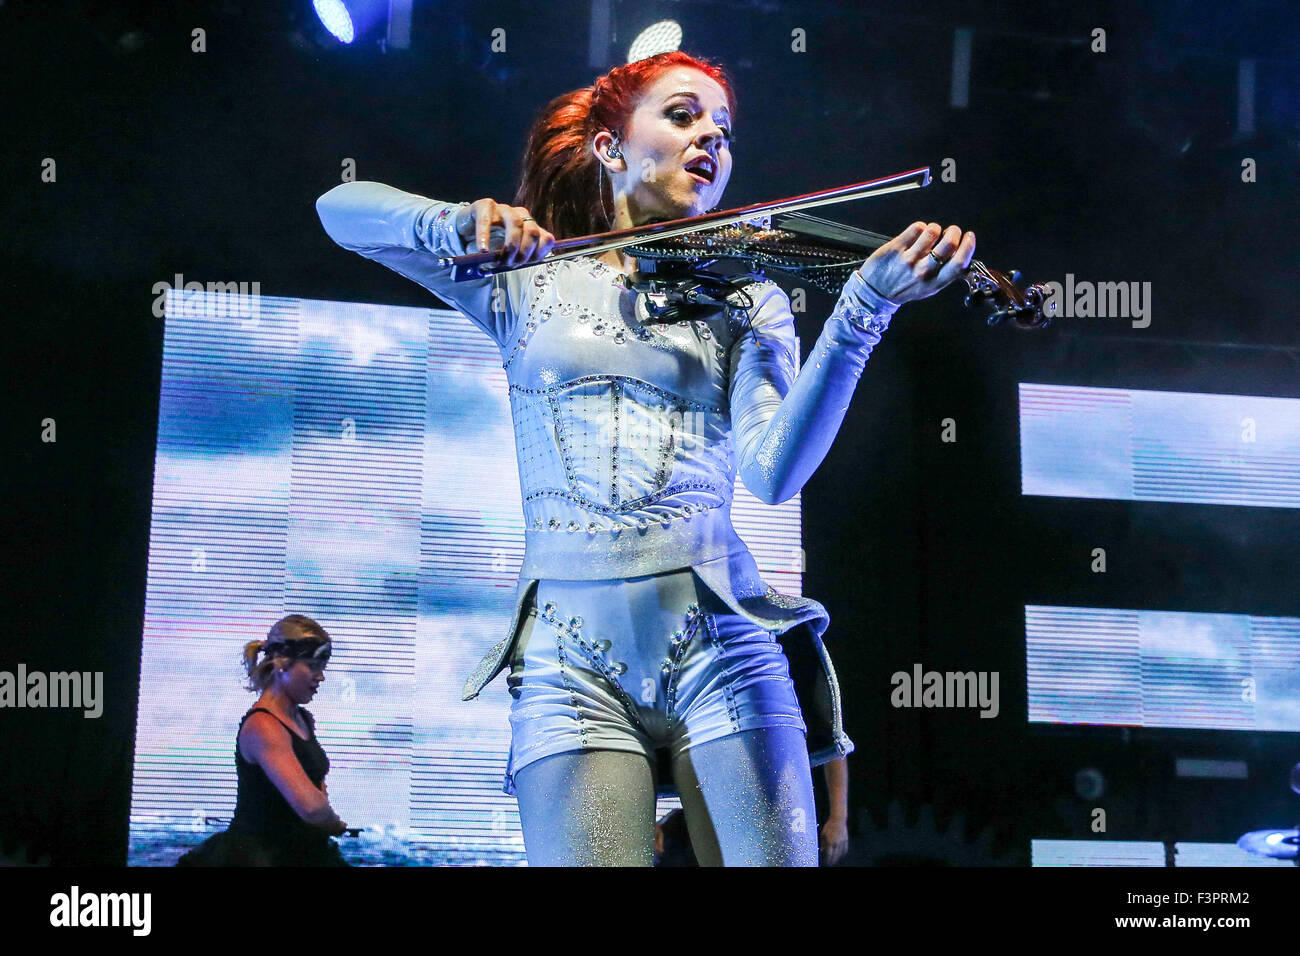 Music Artist LINDSEY STIRLING performs at the Red Hat Amphitheater in North Carolina.  Lindsey Stirling (born September 21, 1986) is an American violinist, dancer, performance artist, and composer. She presents choreographed violin performances, both live and in music videos found on her YouTube channel, Lindsey Stirling, which she introduced in 2007. Stock Photo